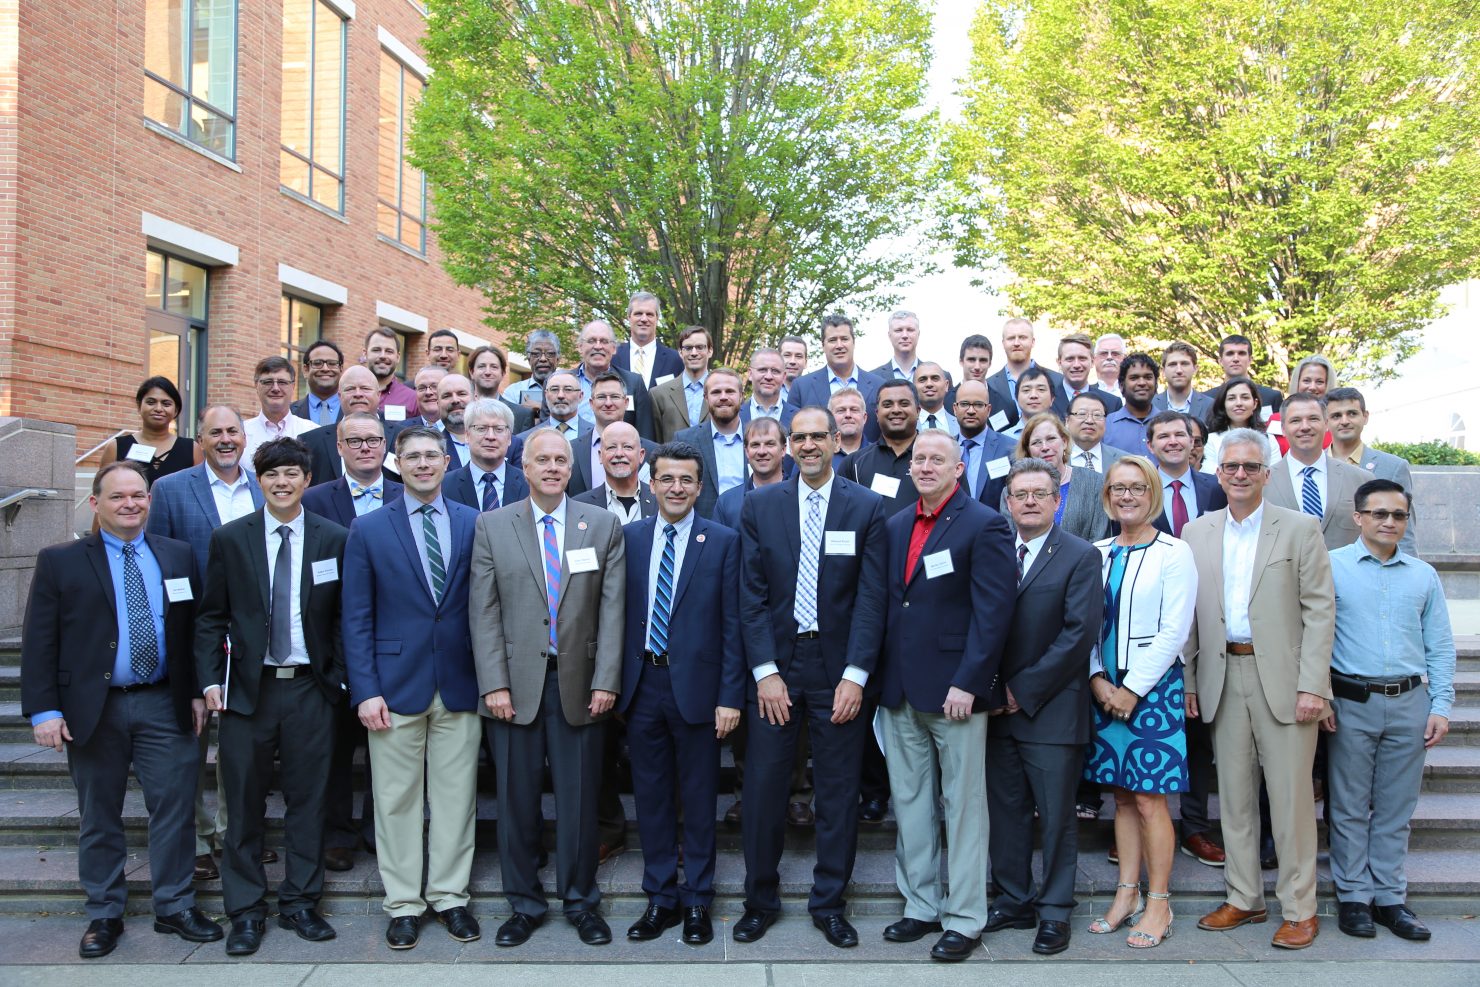 Group photo of the participants in the launch of the CYAN-MEST Centers of Excellence